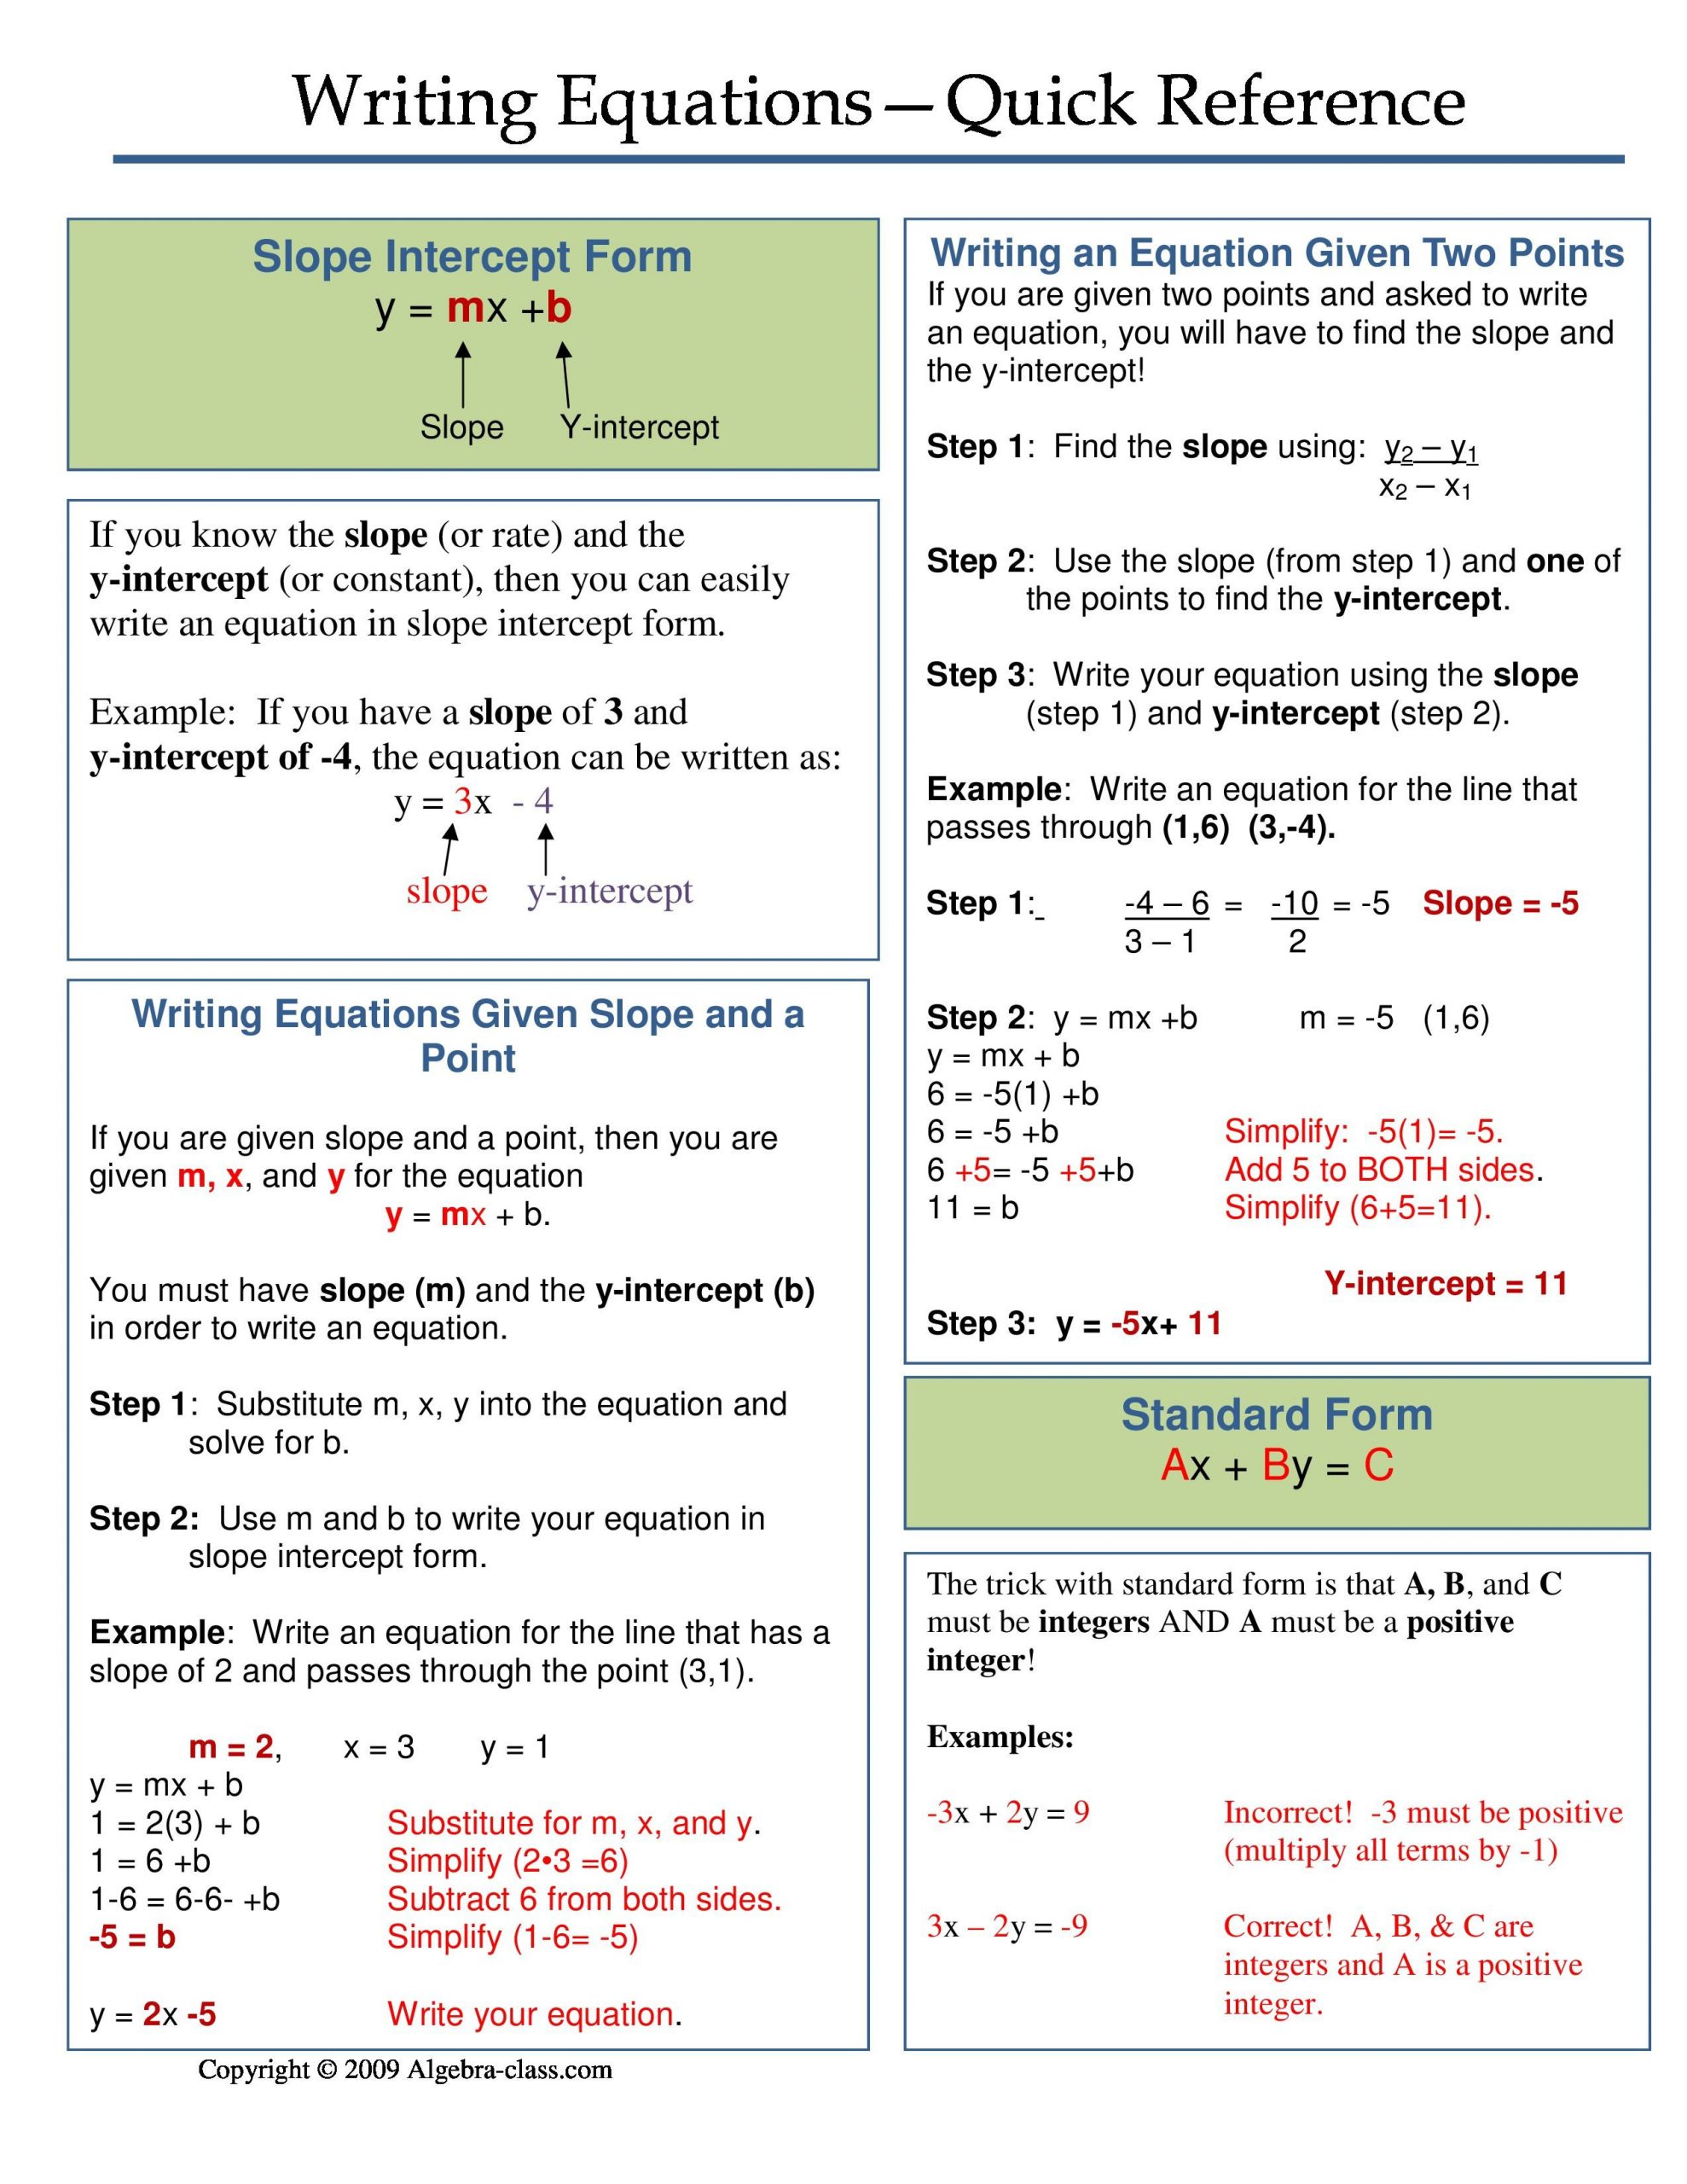 Writing Equations From Tables Worksheet E Page Notes Worksheet for Writing Equations Unit